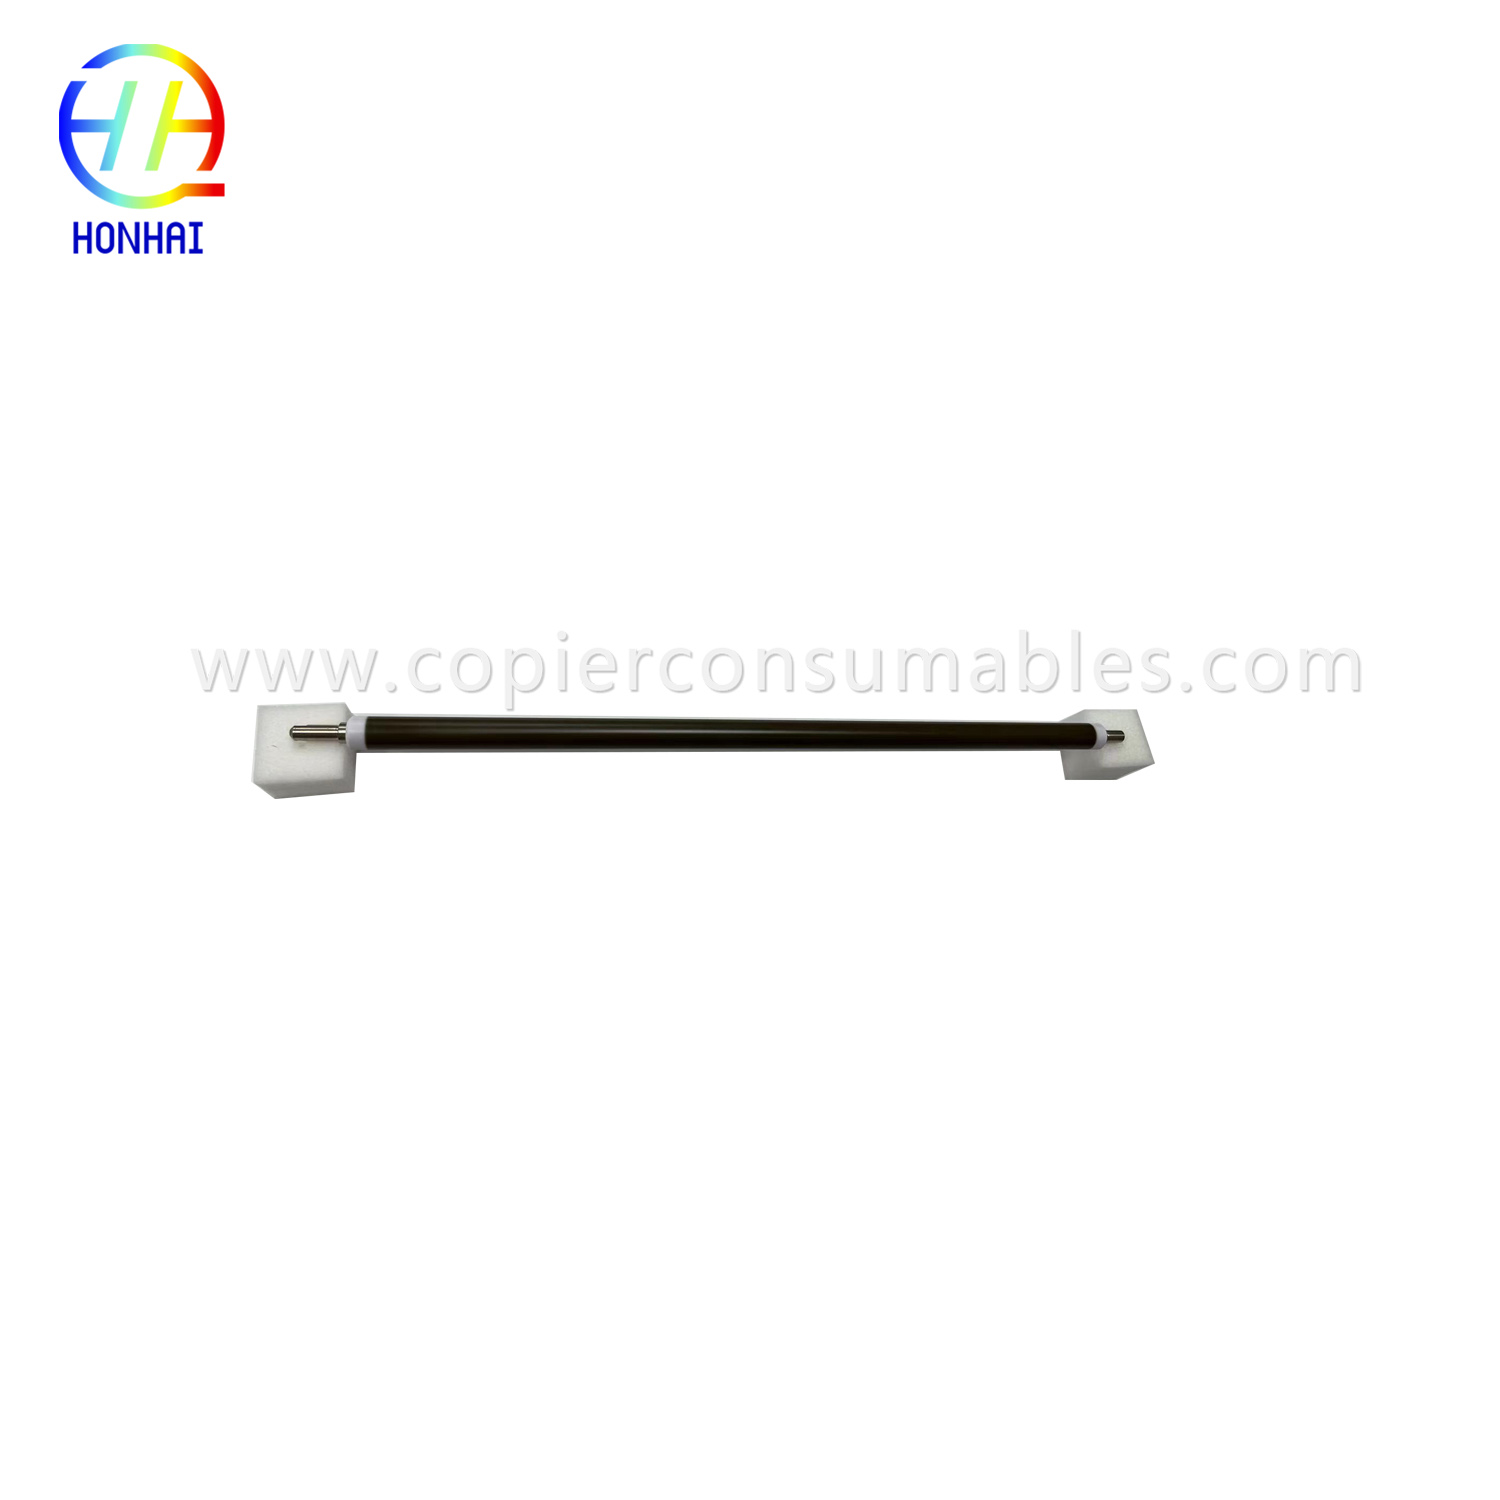 Primary Charge Roller for HP LaserJet 8000 8100 8150